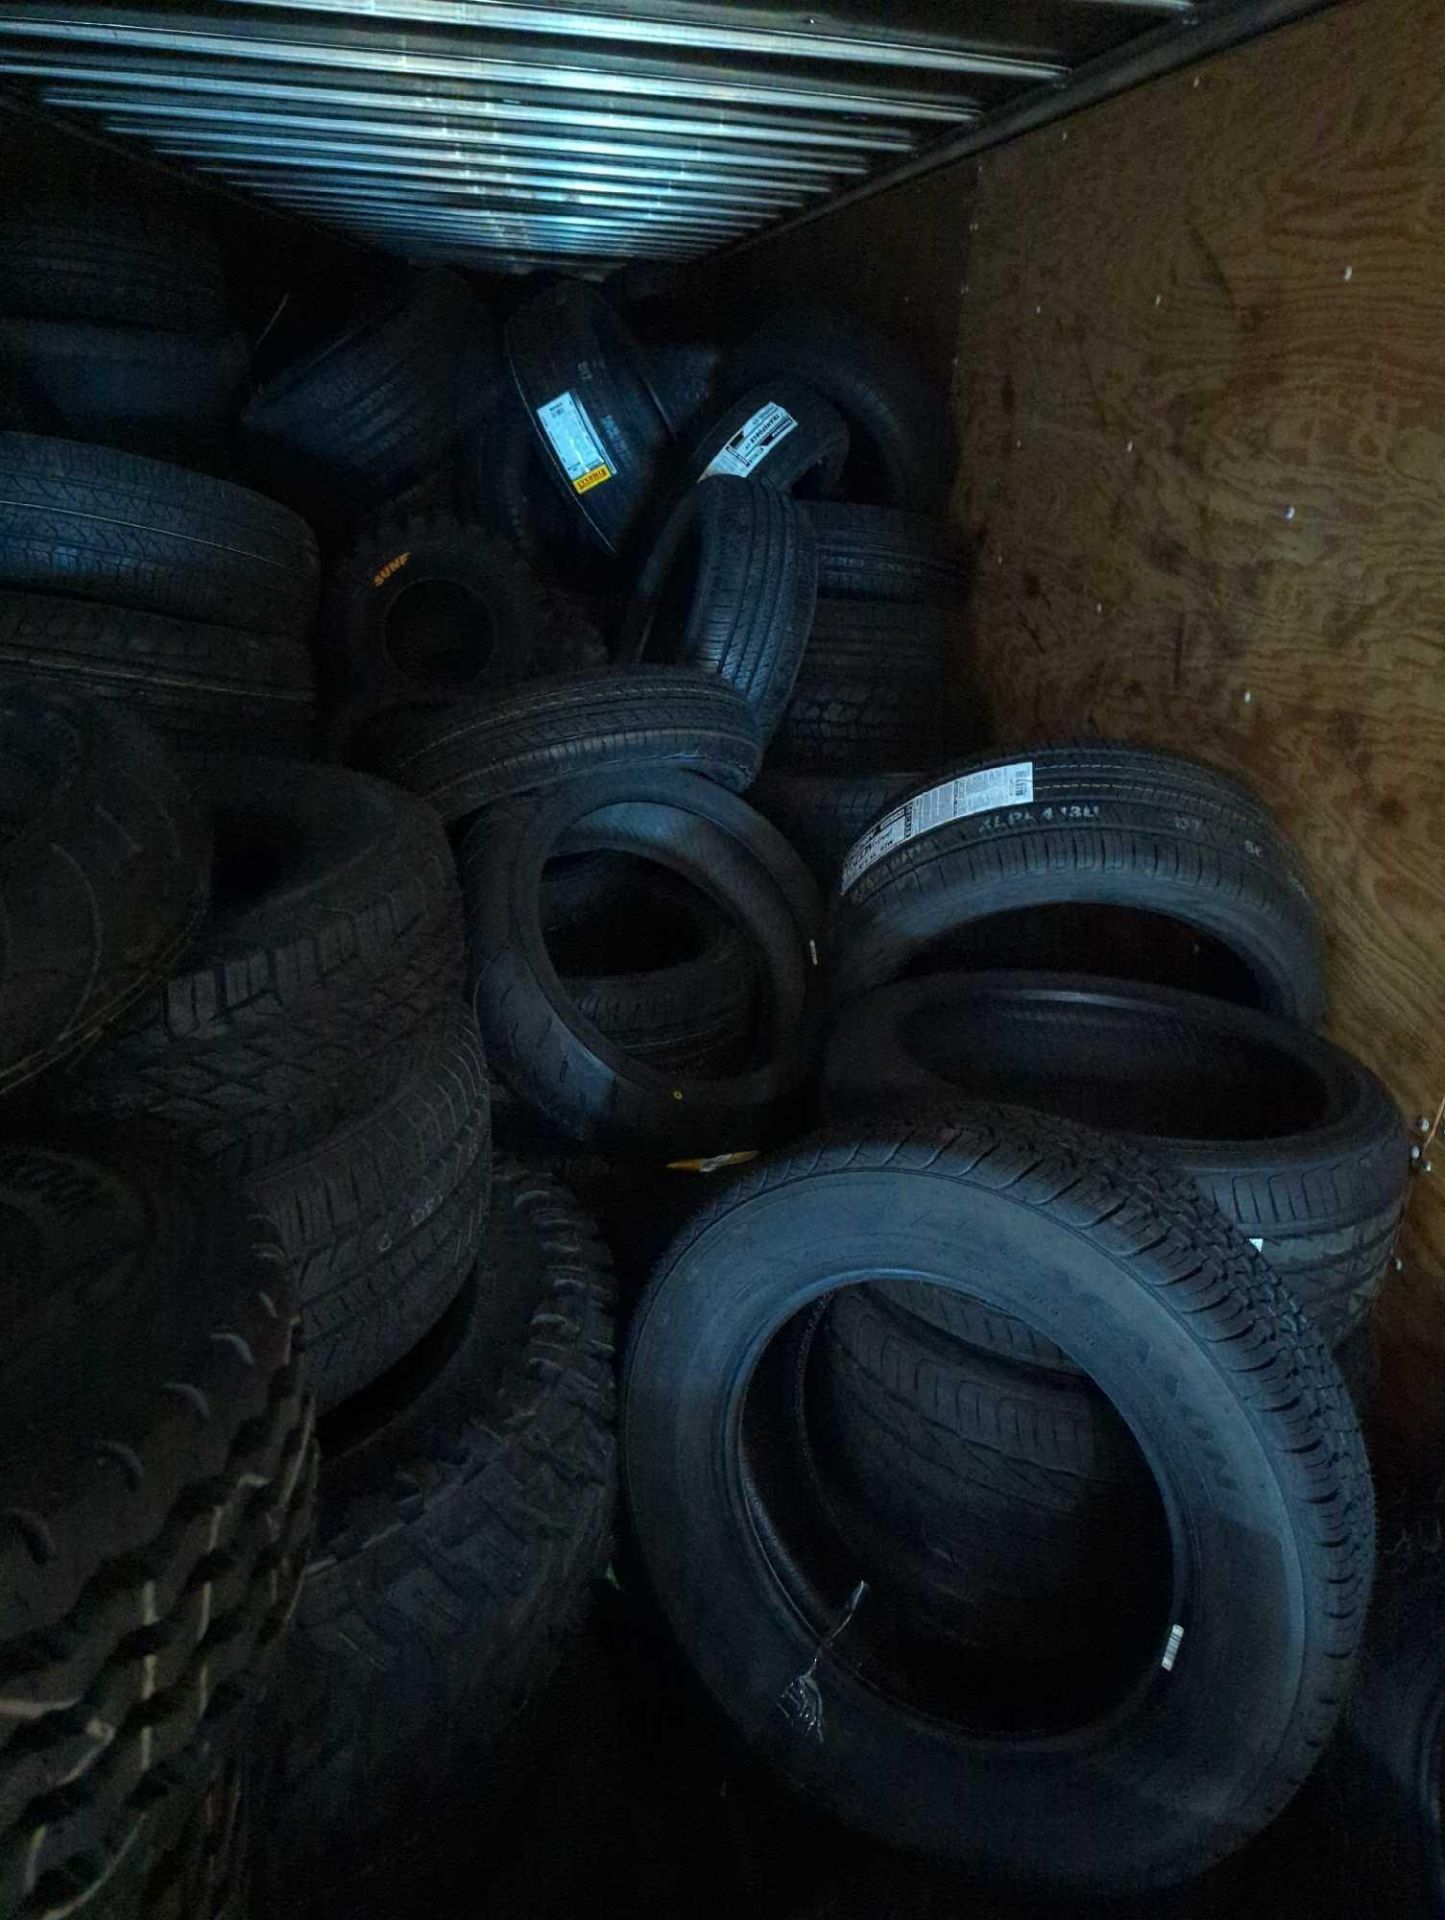 Tires - Image 17 of 40